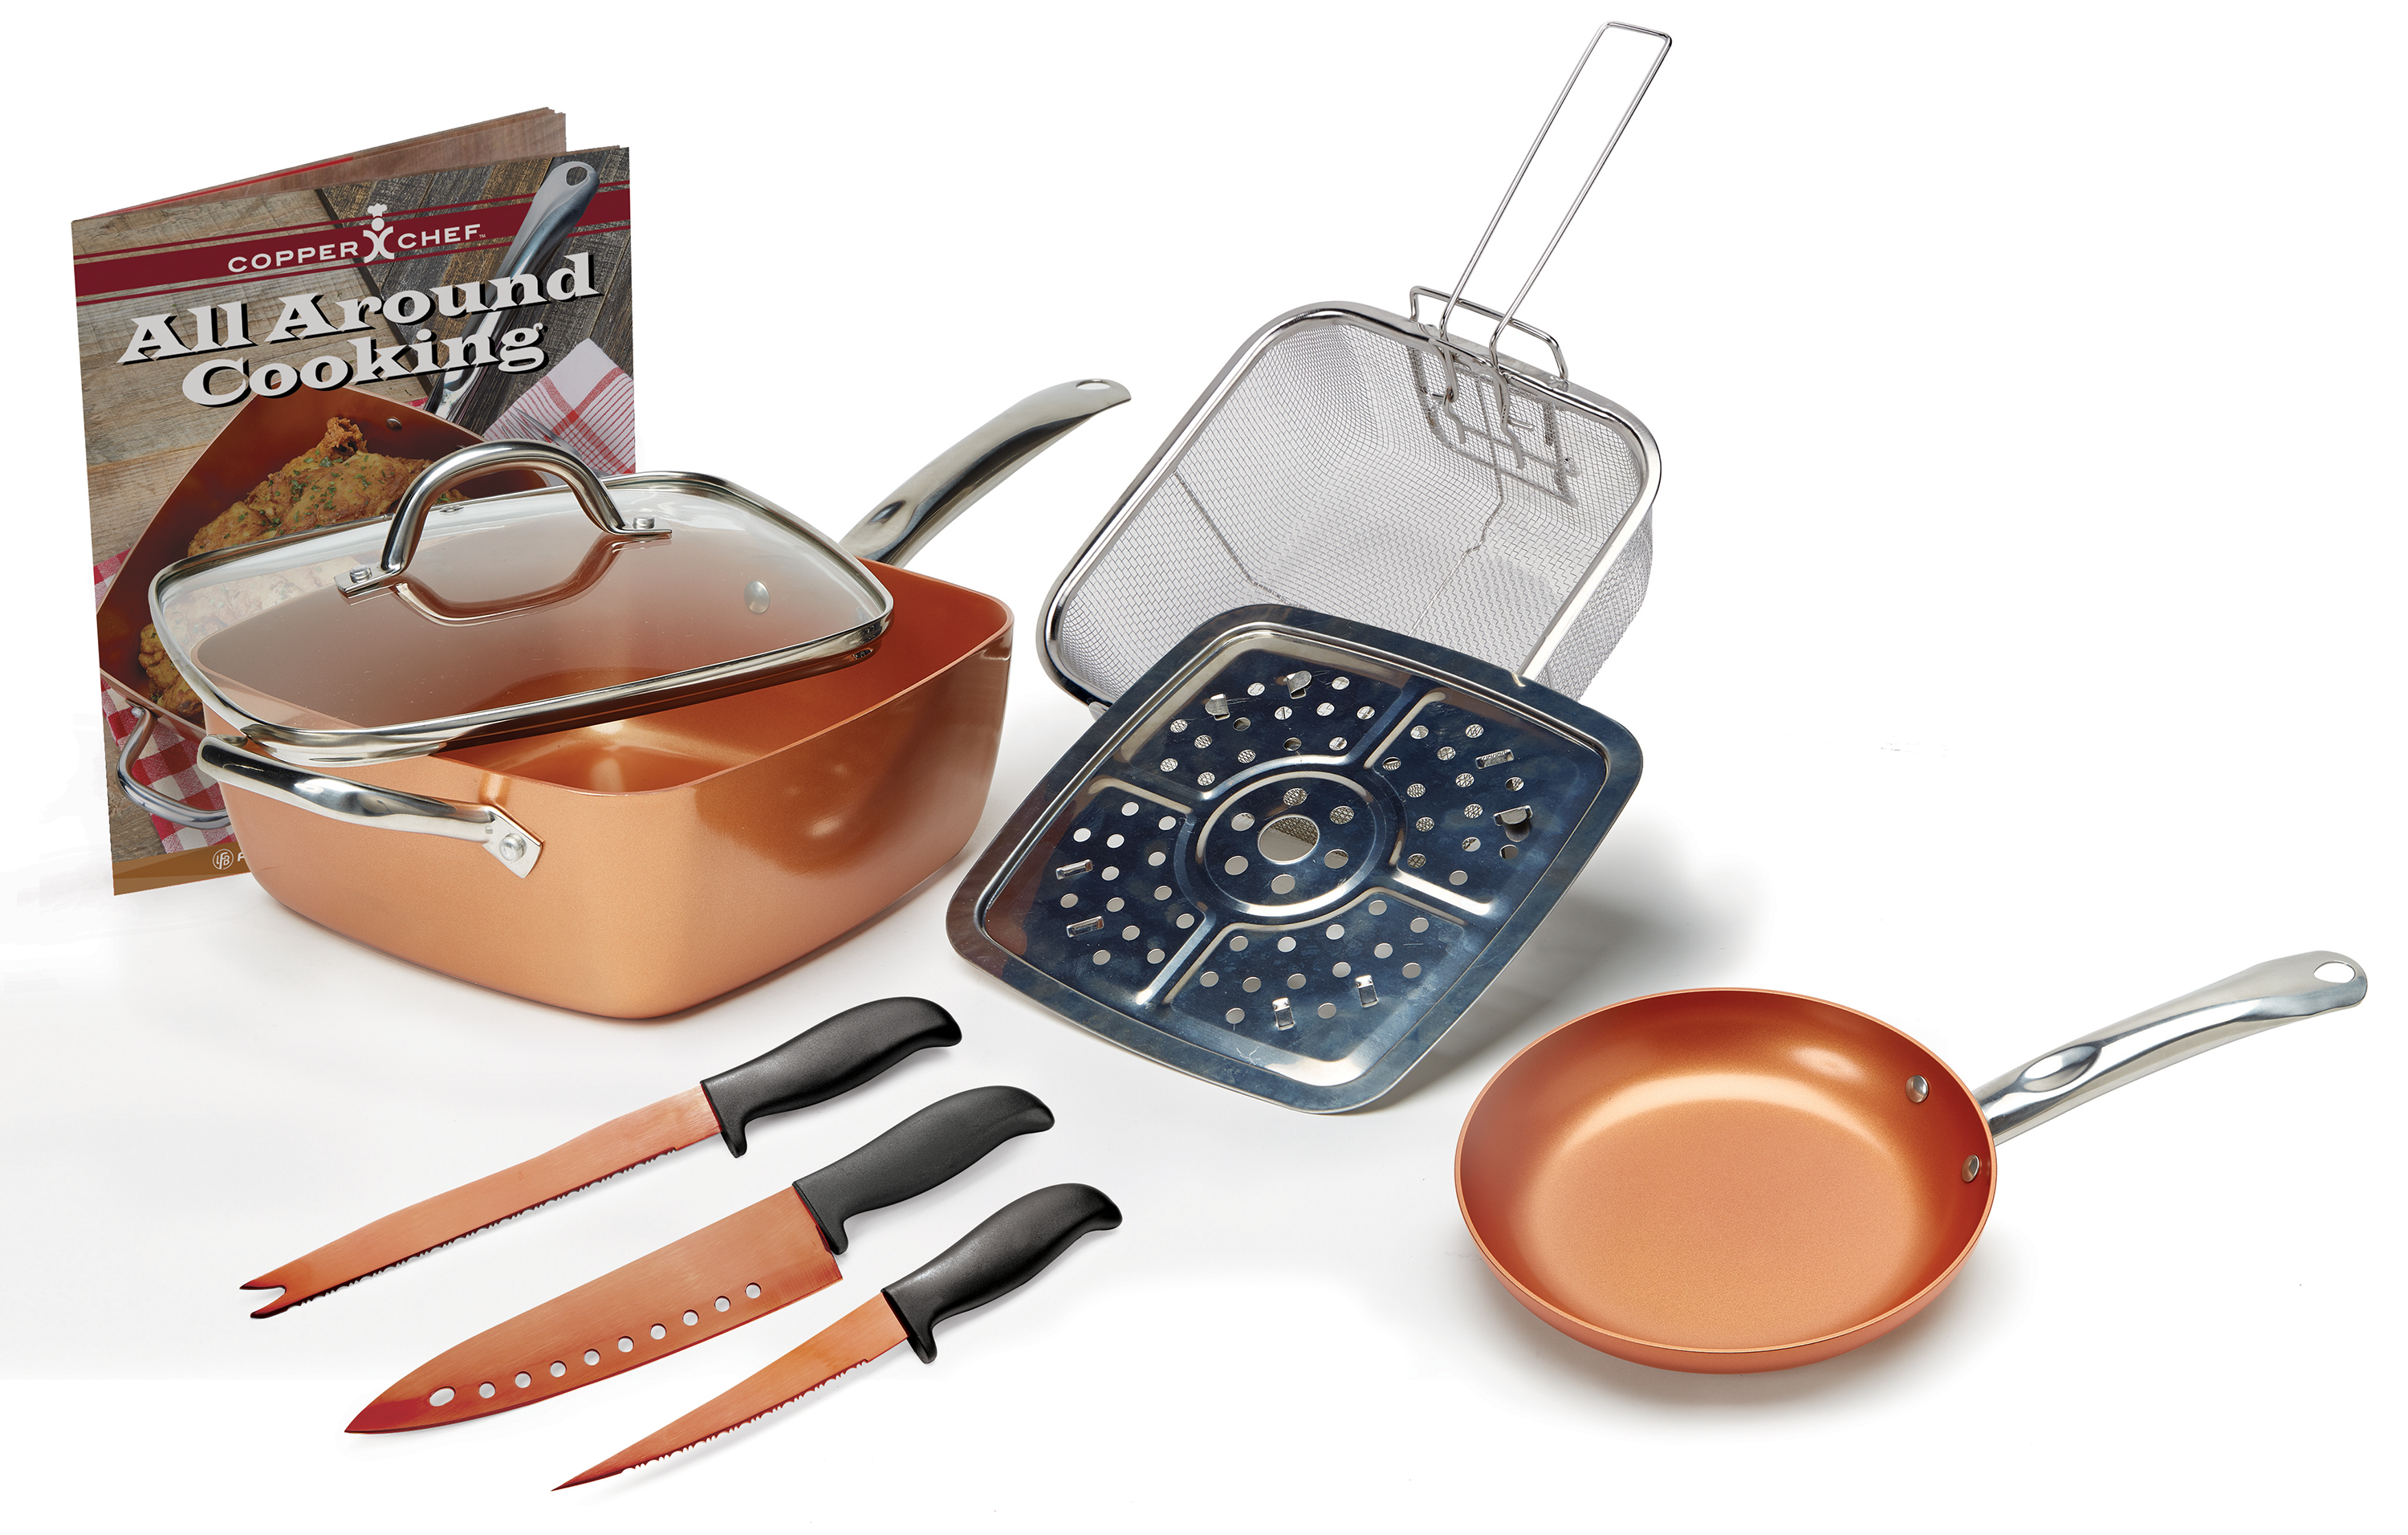 Copper Chef 9-piece pan set for $40, free shipping